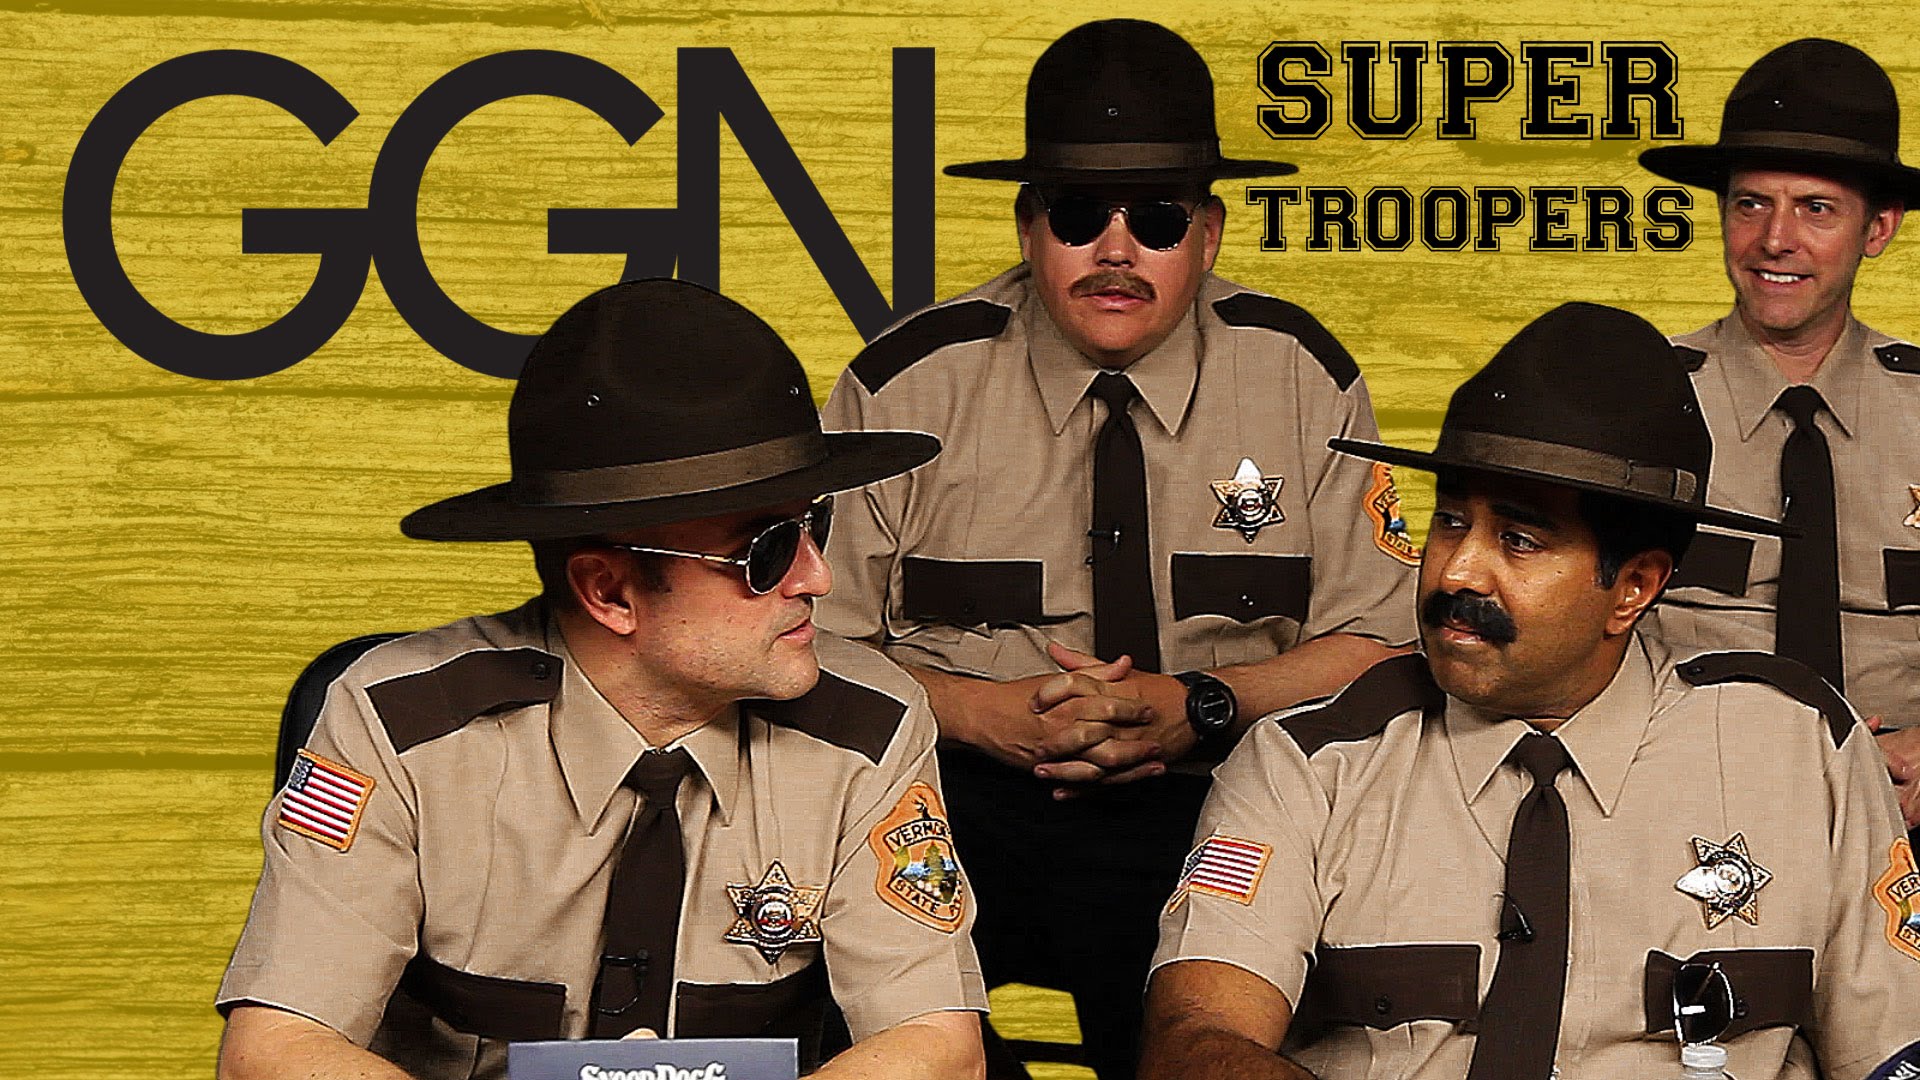 Super Troopers Backgrounds, Compatible - PC, Mobile, Gadgets| 1920x1080 px